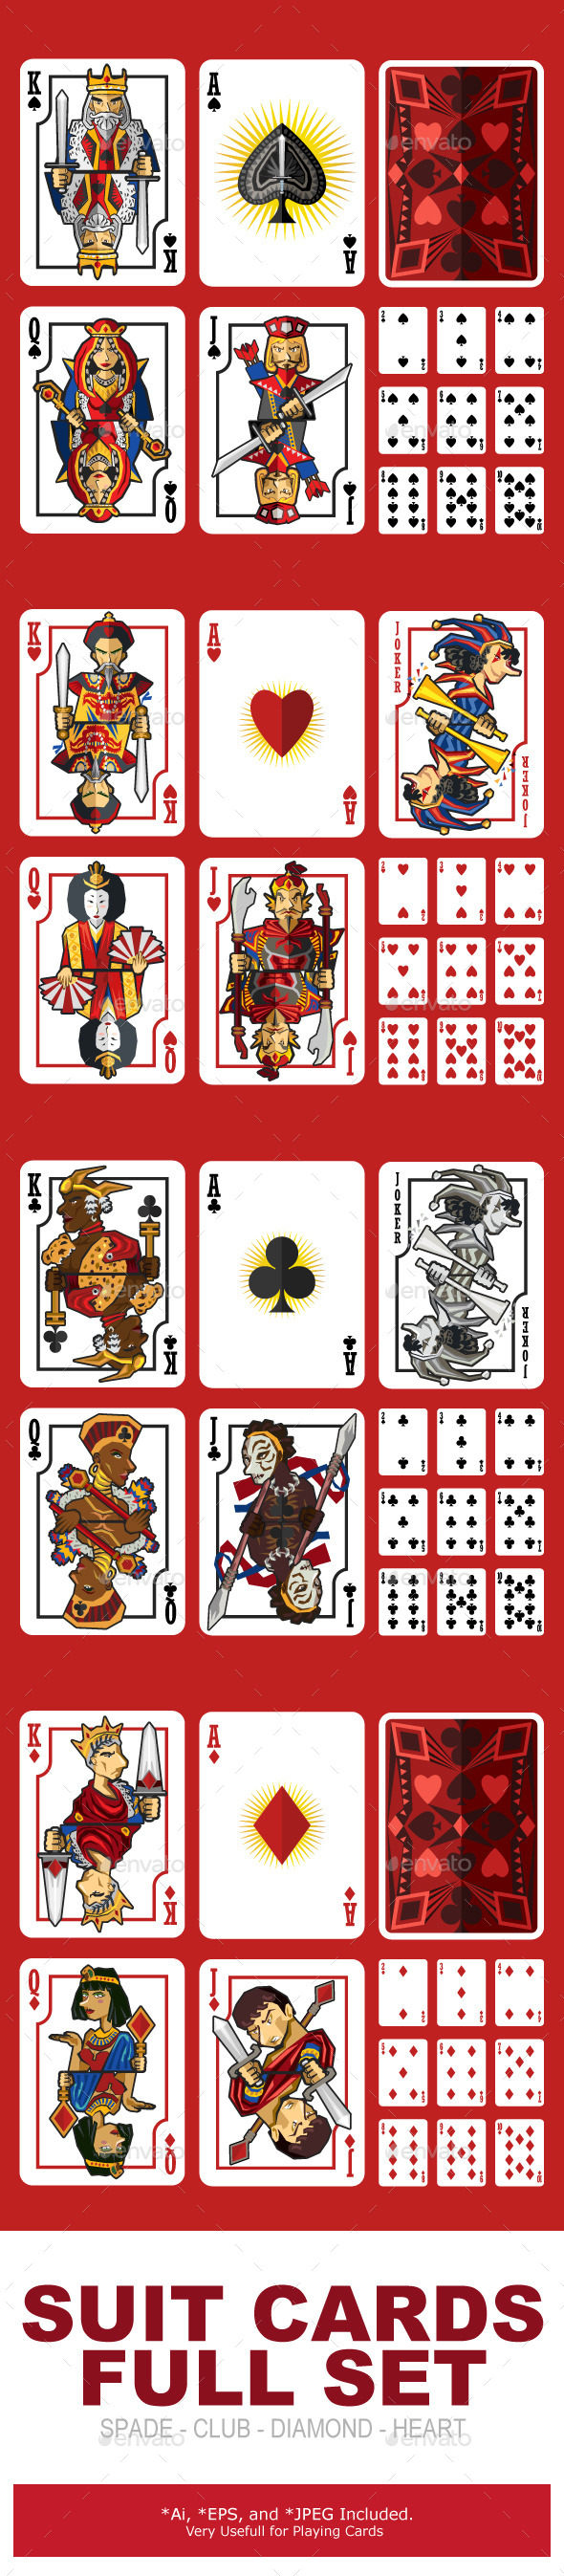 Suit Playing Cards Full Set